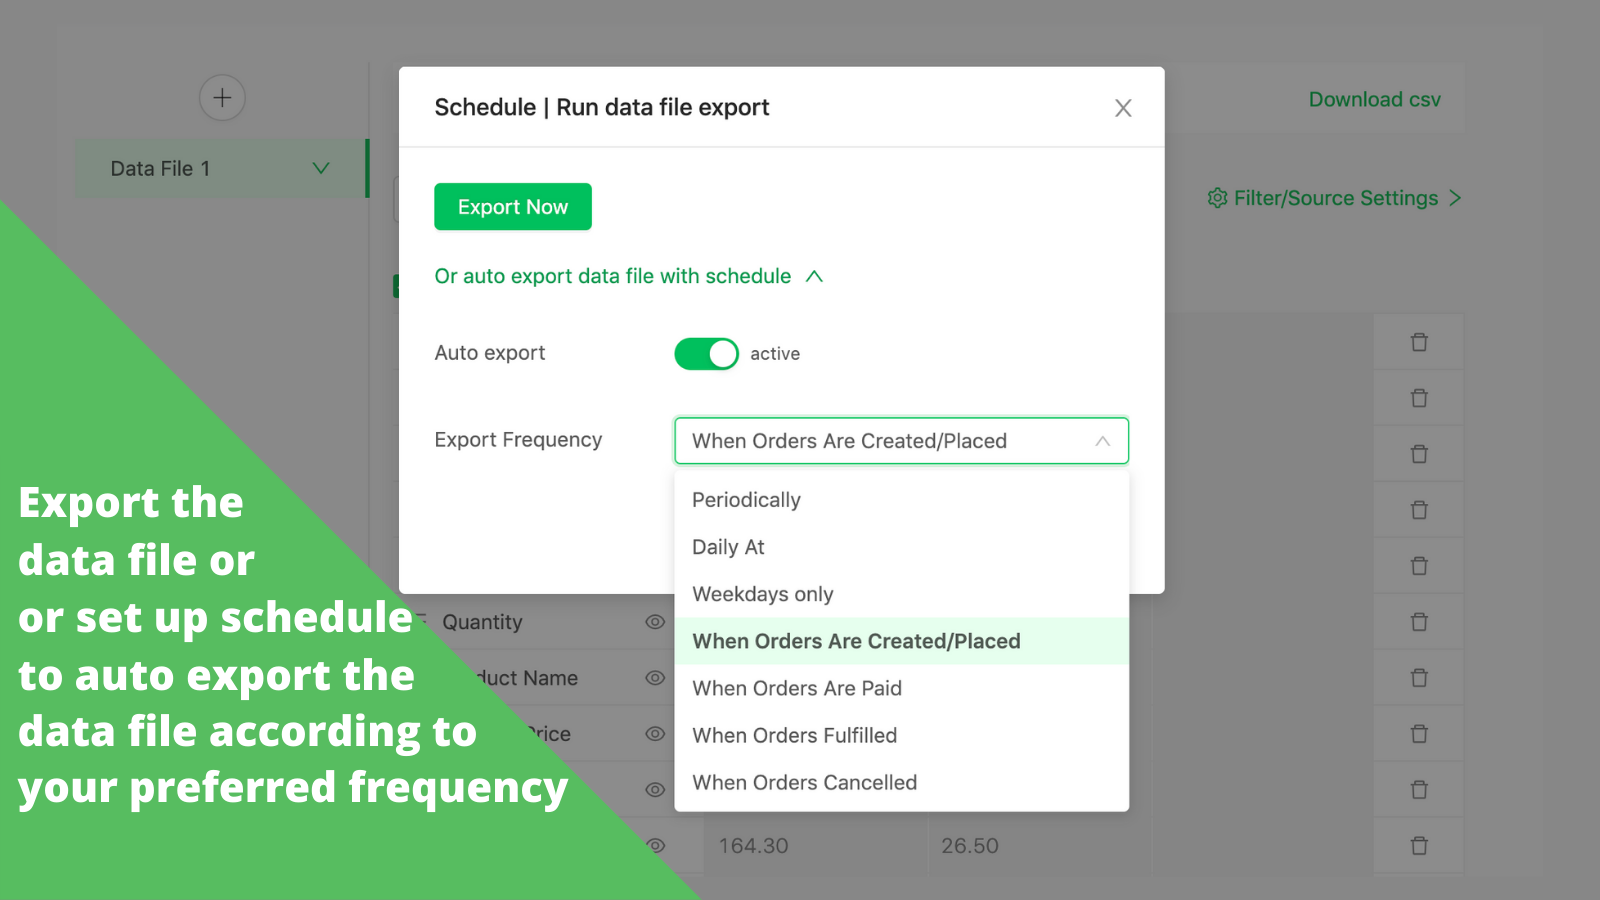 Automate your export by scheduling